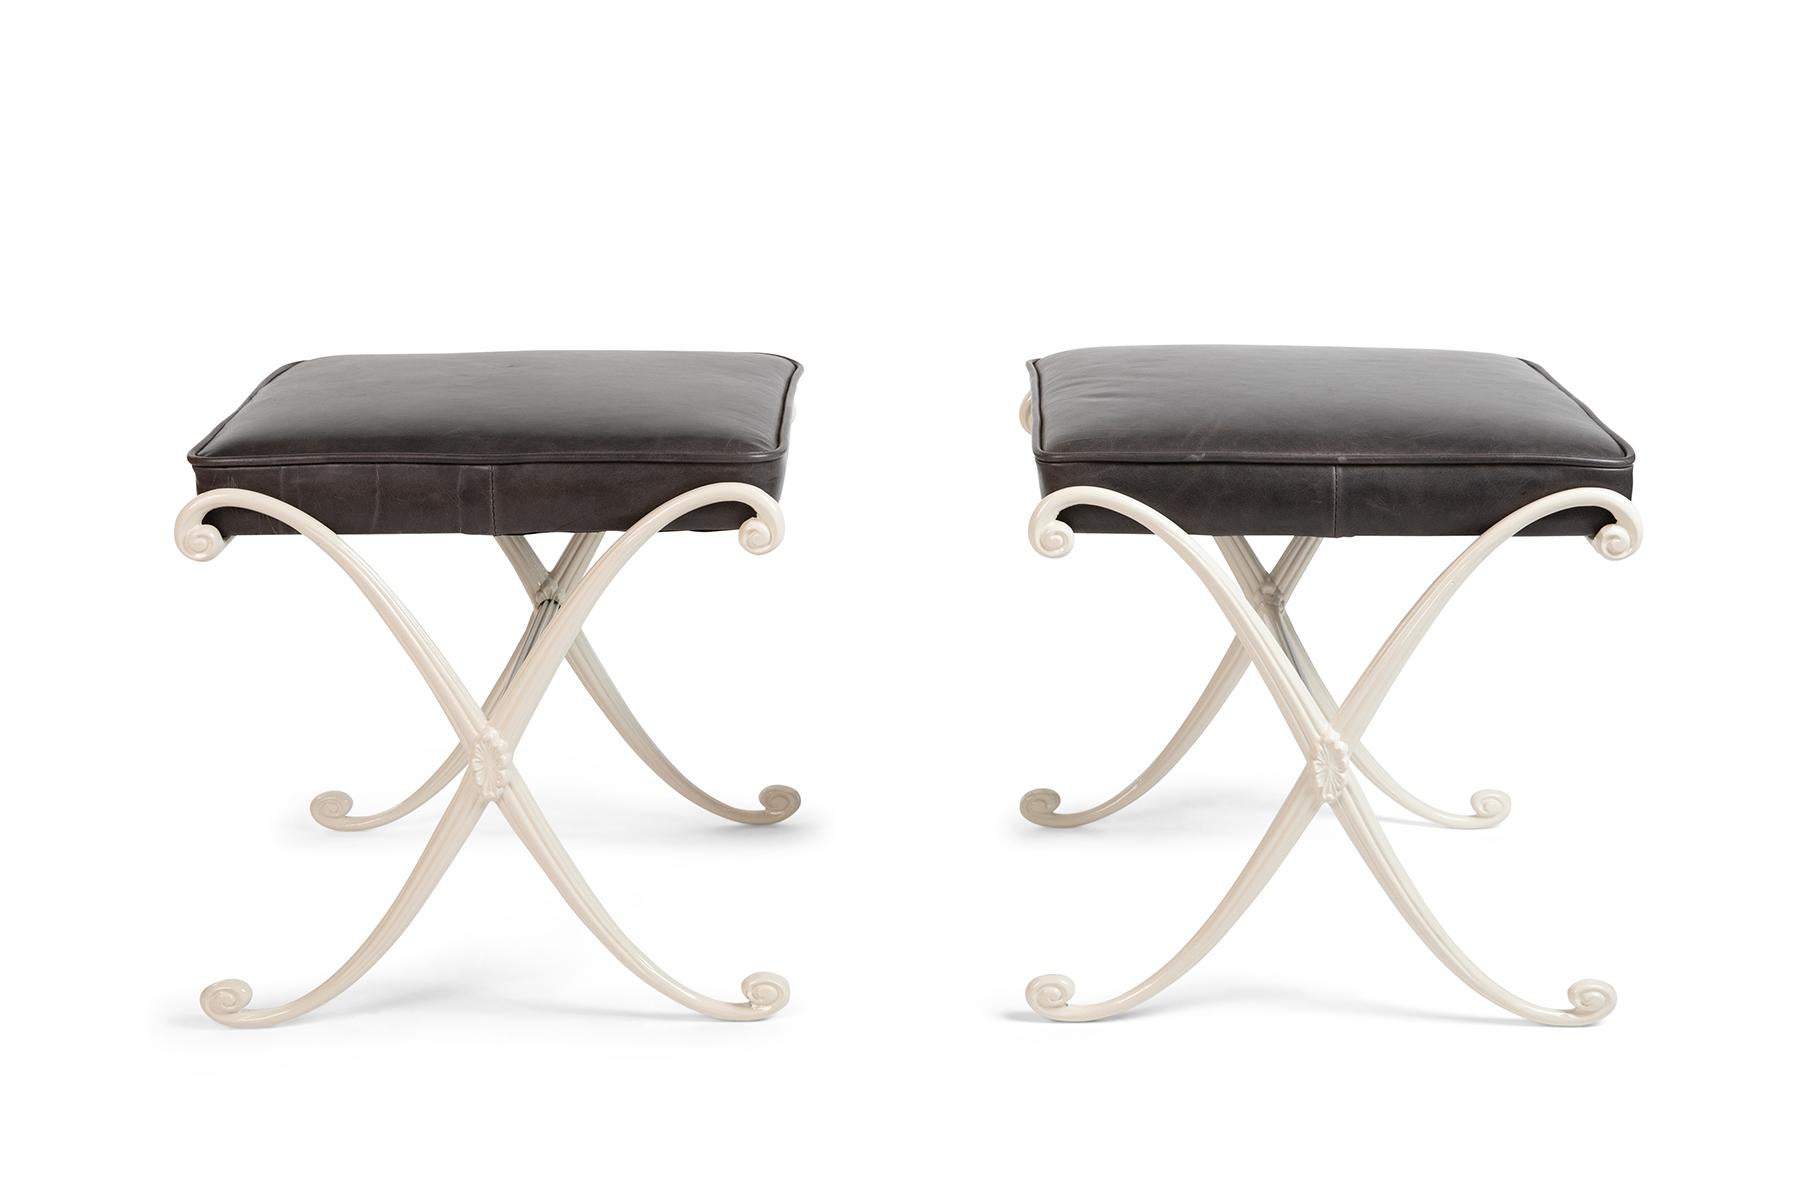 Pair of Thinline leather and aluminum ottomans circa early 1960s. These examples have been newly upholstered in a supple charcoal leather and newly powder-coated in ivory.
The stretcher bar on one of these has texture and the other is smooth. Price